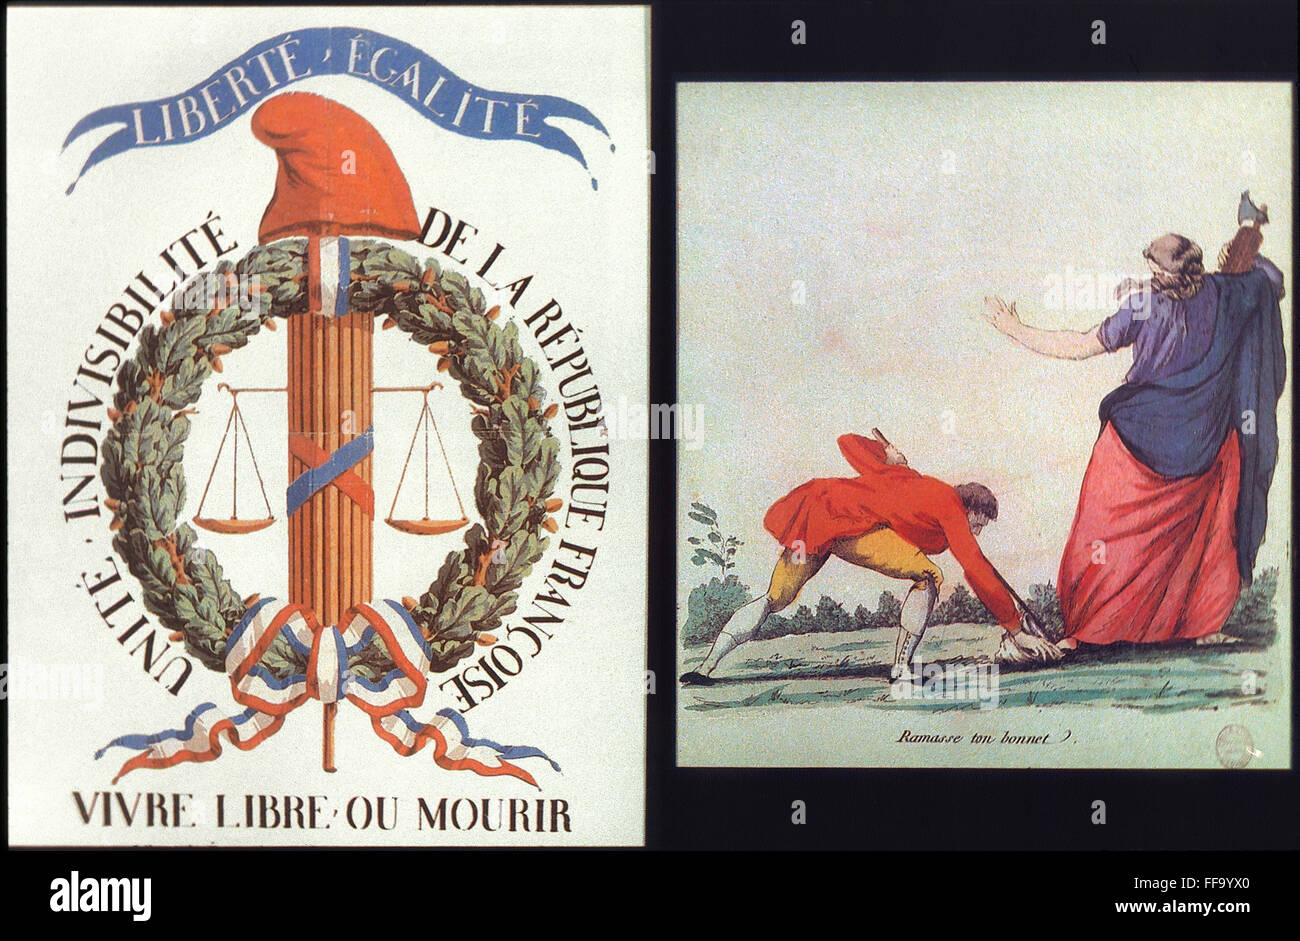 FRENCH REVOLUTION: POSTER. /nLiberte, Egalite: poster, and 'Pick up your cap (of freedom).' Aqua fortis, c1793. Stock Photo